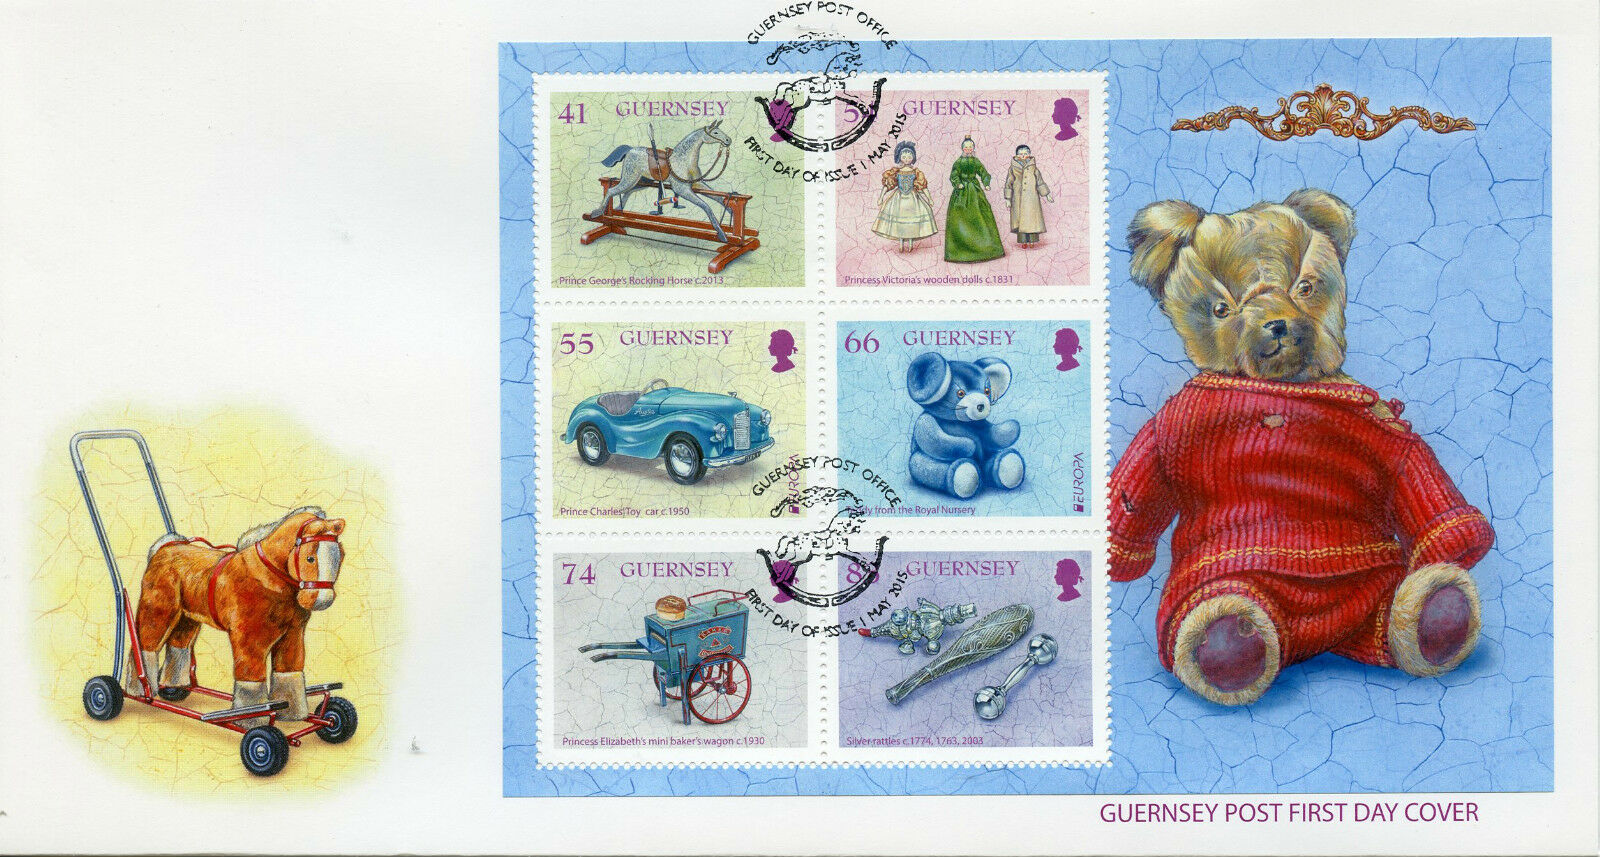 Guernsey 2015 FDC Old Toys Europa 6v M/S Cover Royalty Cars Dolls Teddy